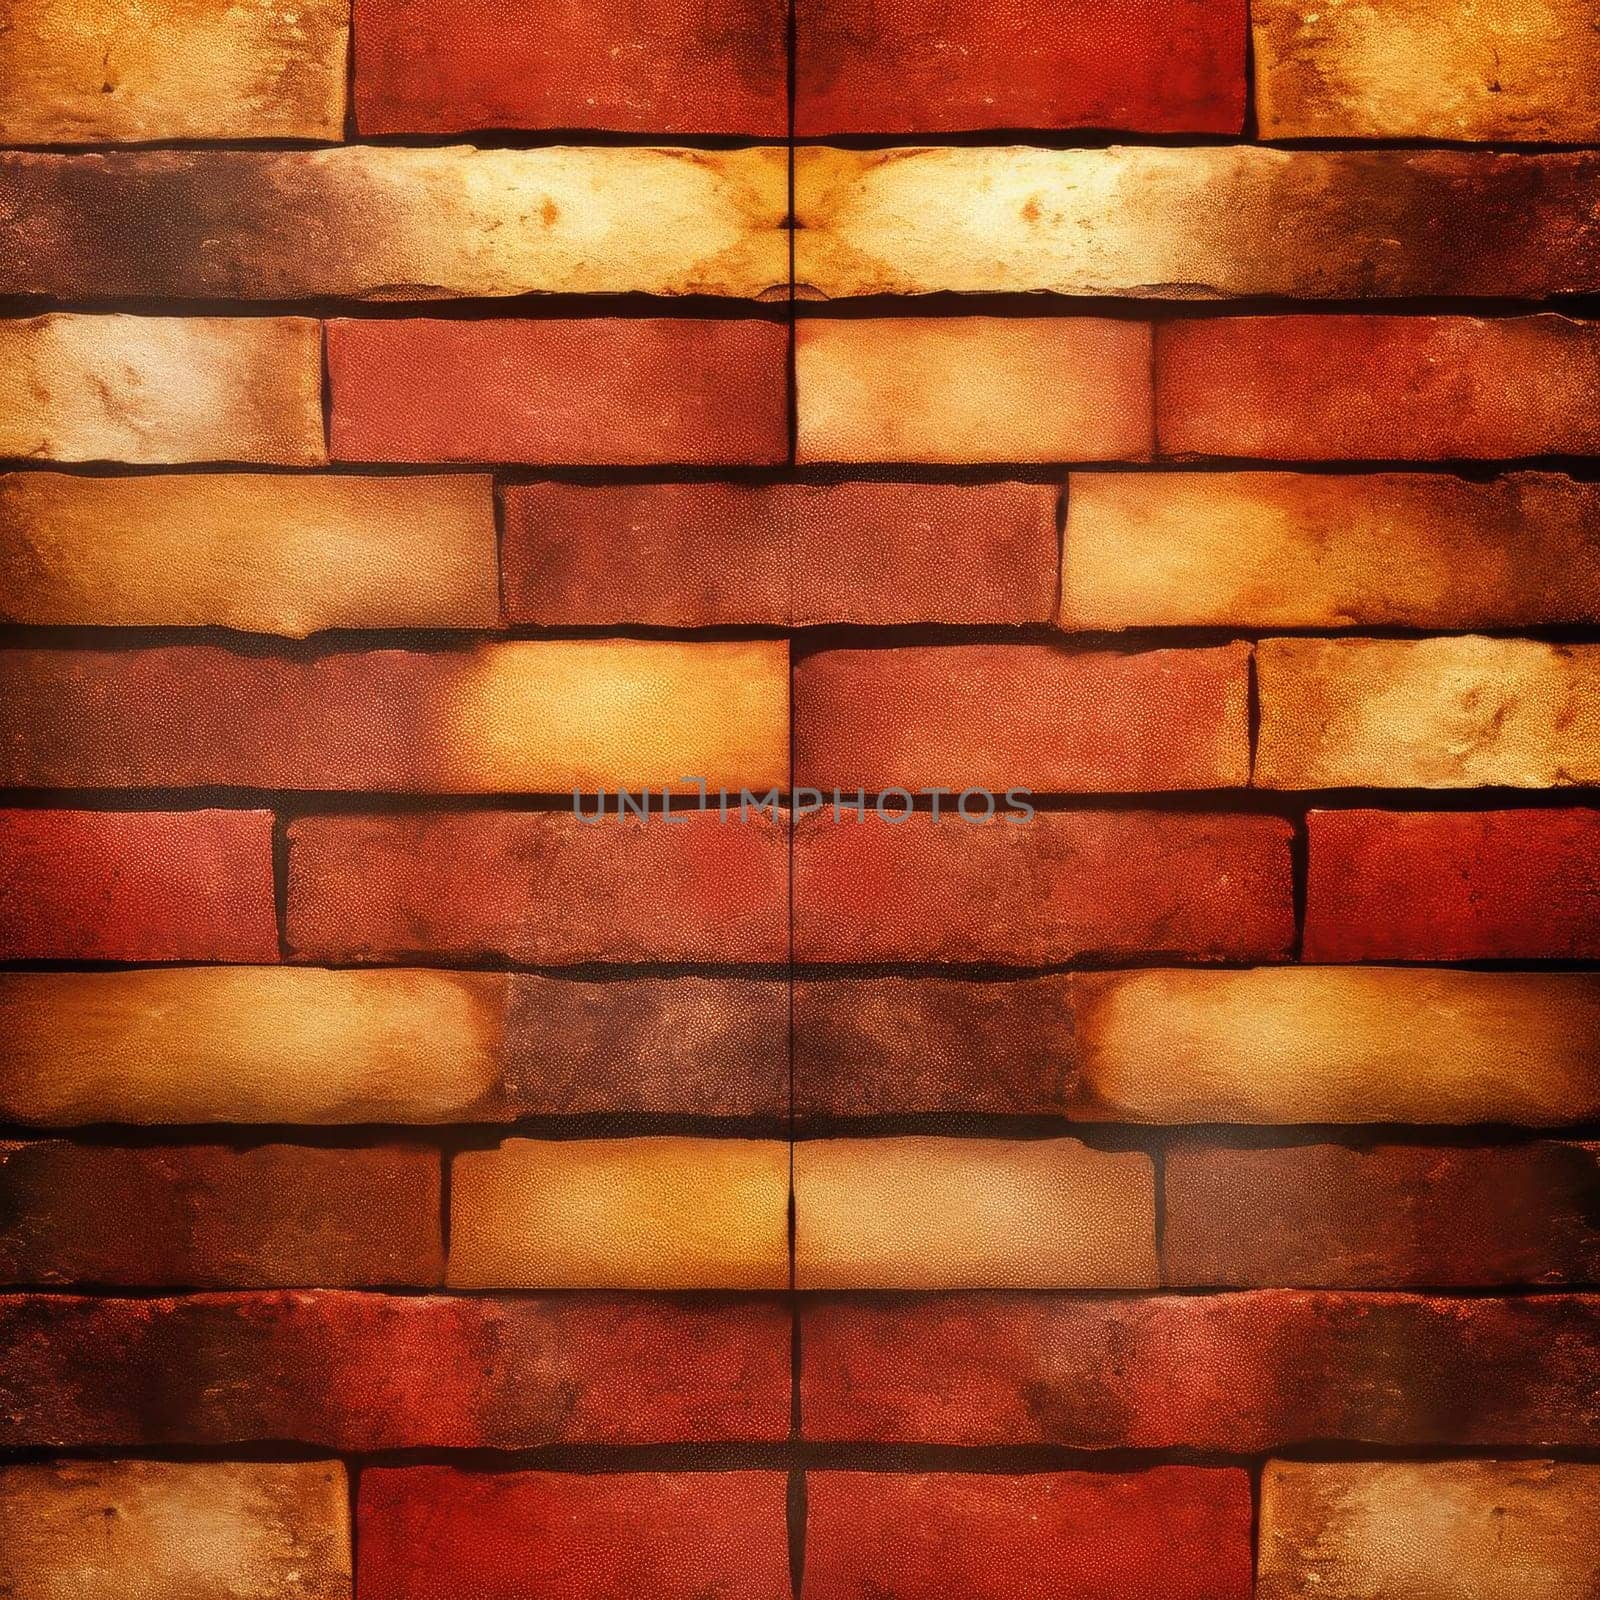 Colorful brick wall texture background - red, orange, yellow, brown colors (ID: 001709)